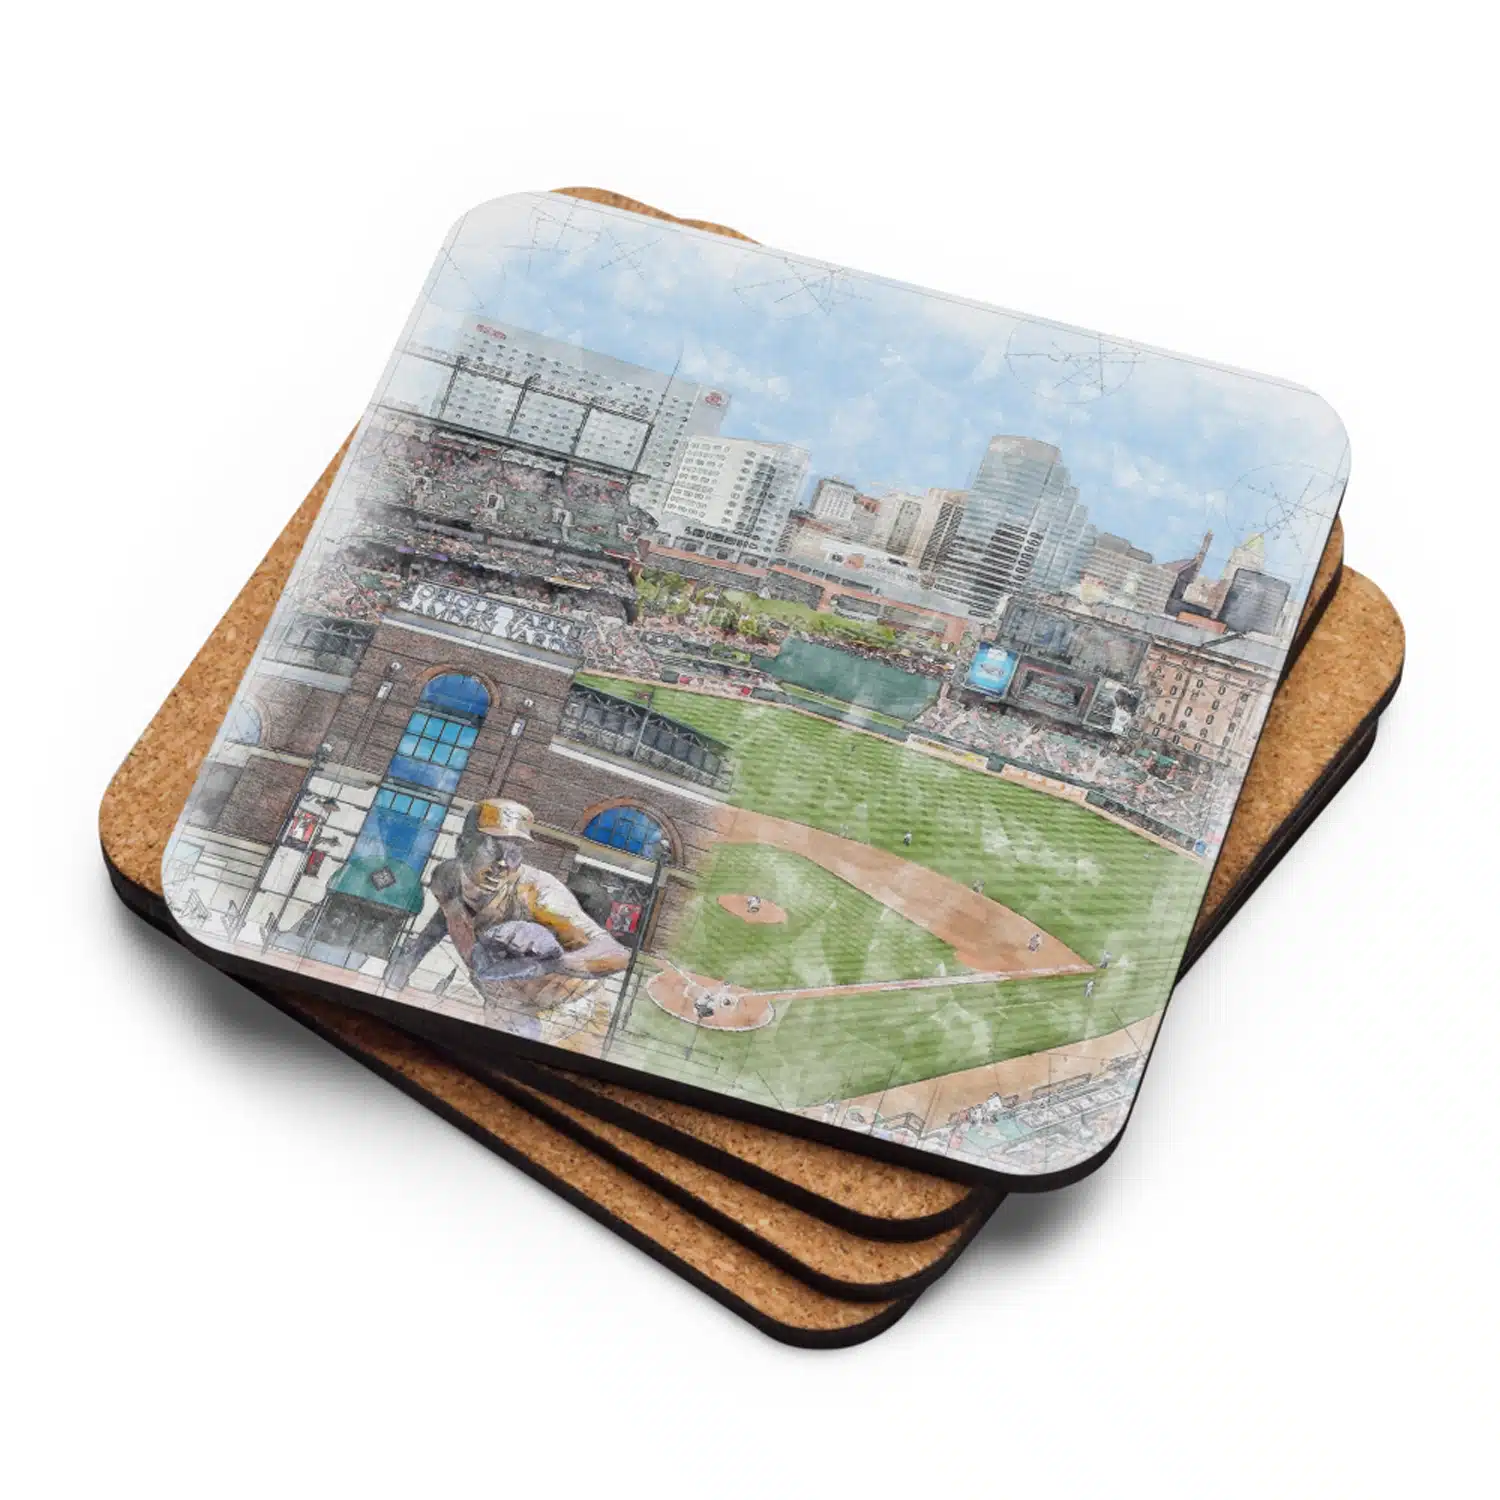 Oriole Park at Camden Yards High Gloss Coated, Cork-Backed Drink Coaster, Baltimore Orioles Baseball